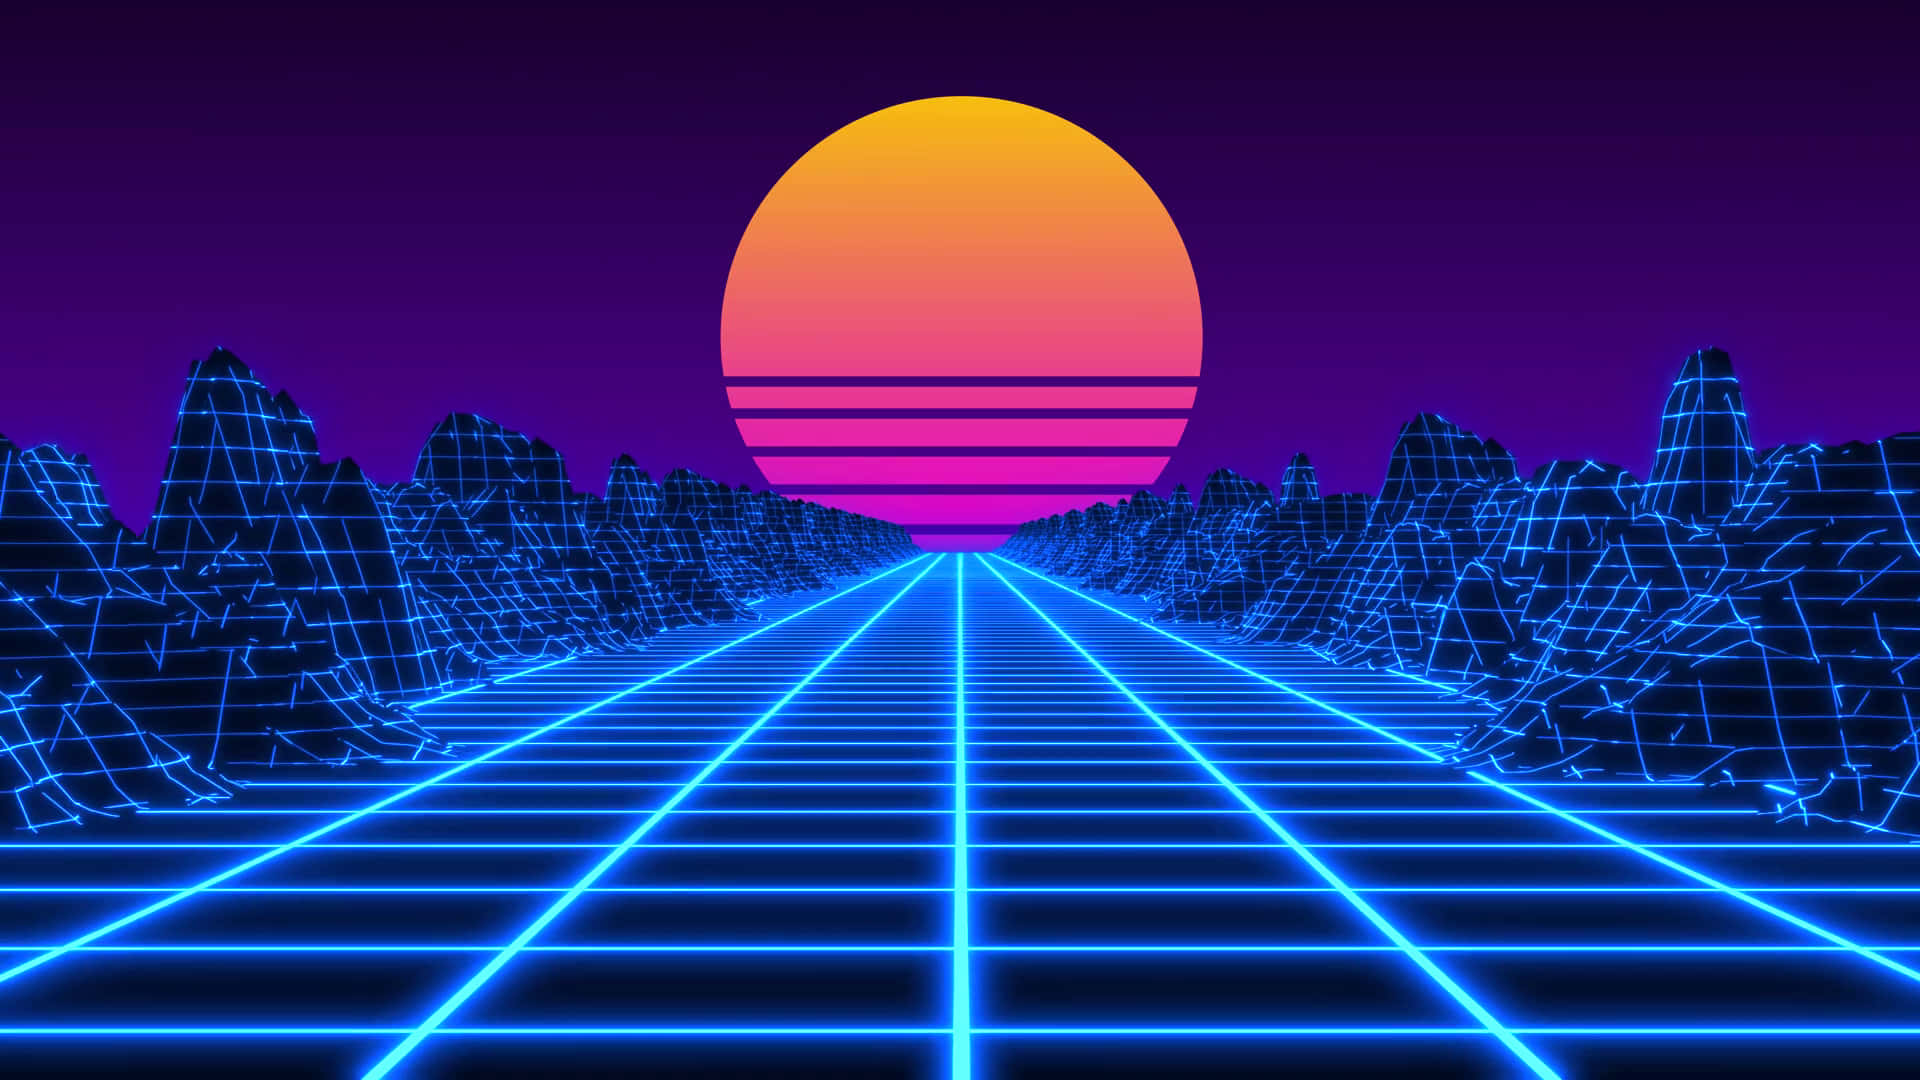 Get your nostalgia on with this striking Retrowave wall.